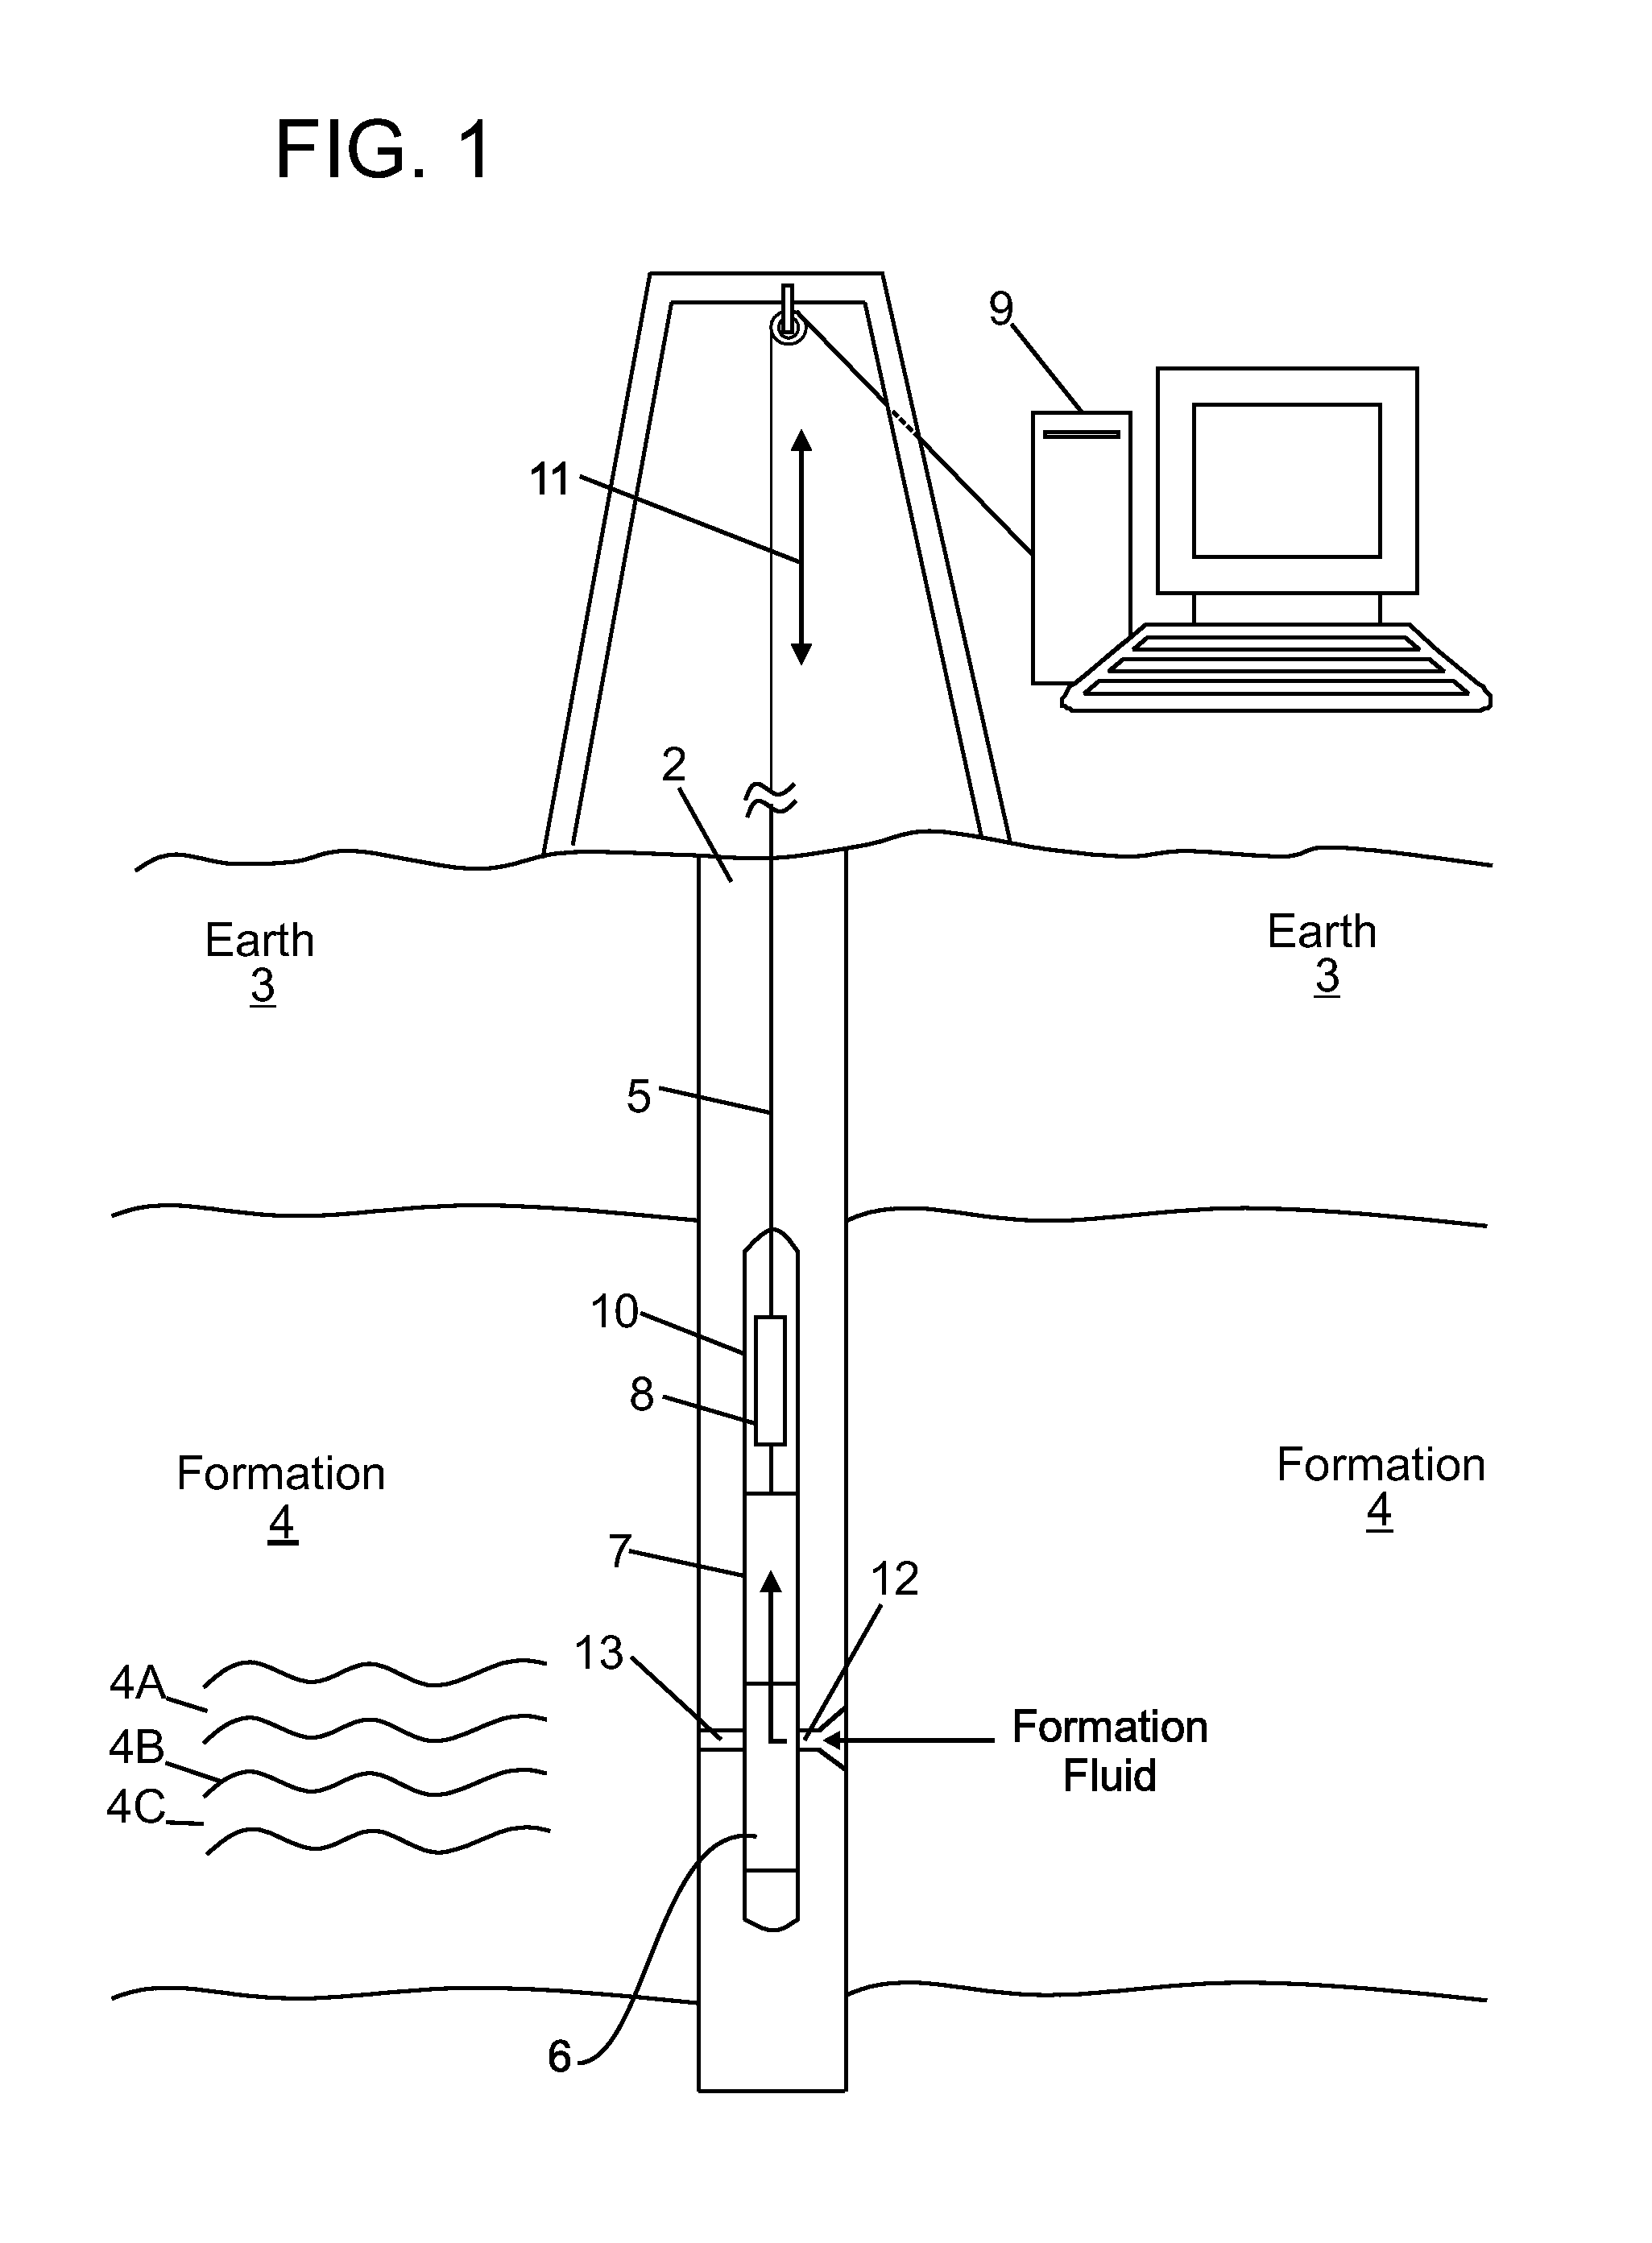 Dielectric spectroscopy for downhole fluid analysis during formation testing